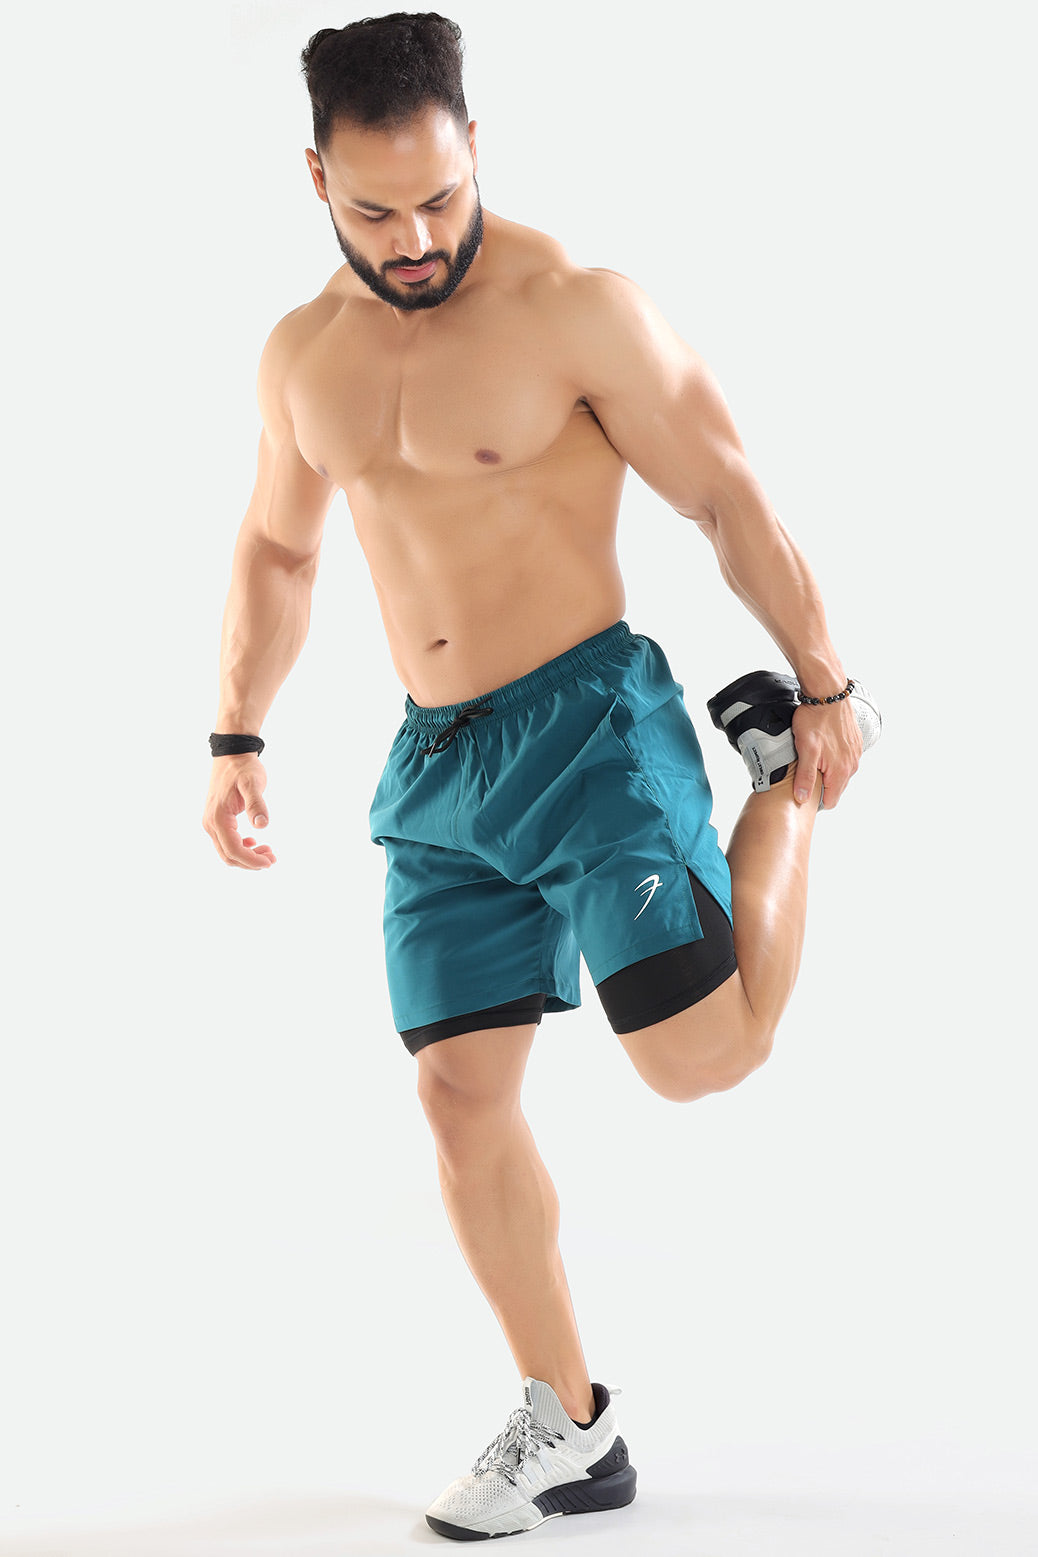 2 in 1 Compression Shorts Teal